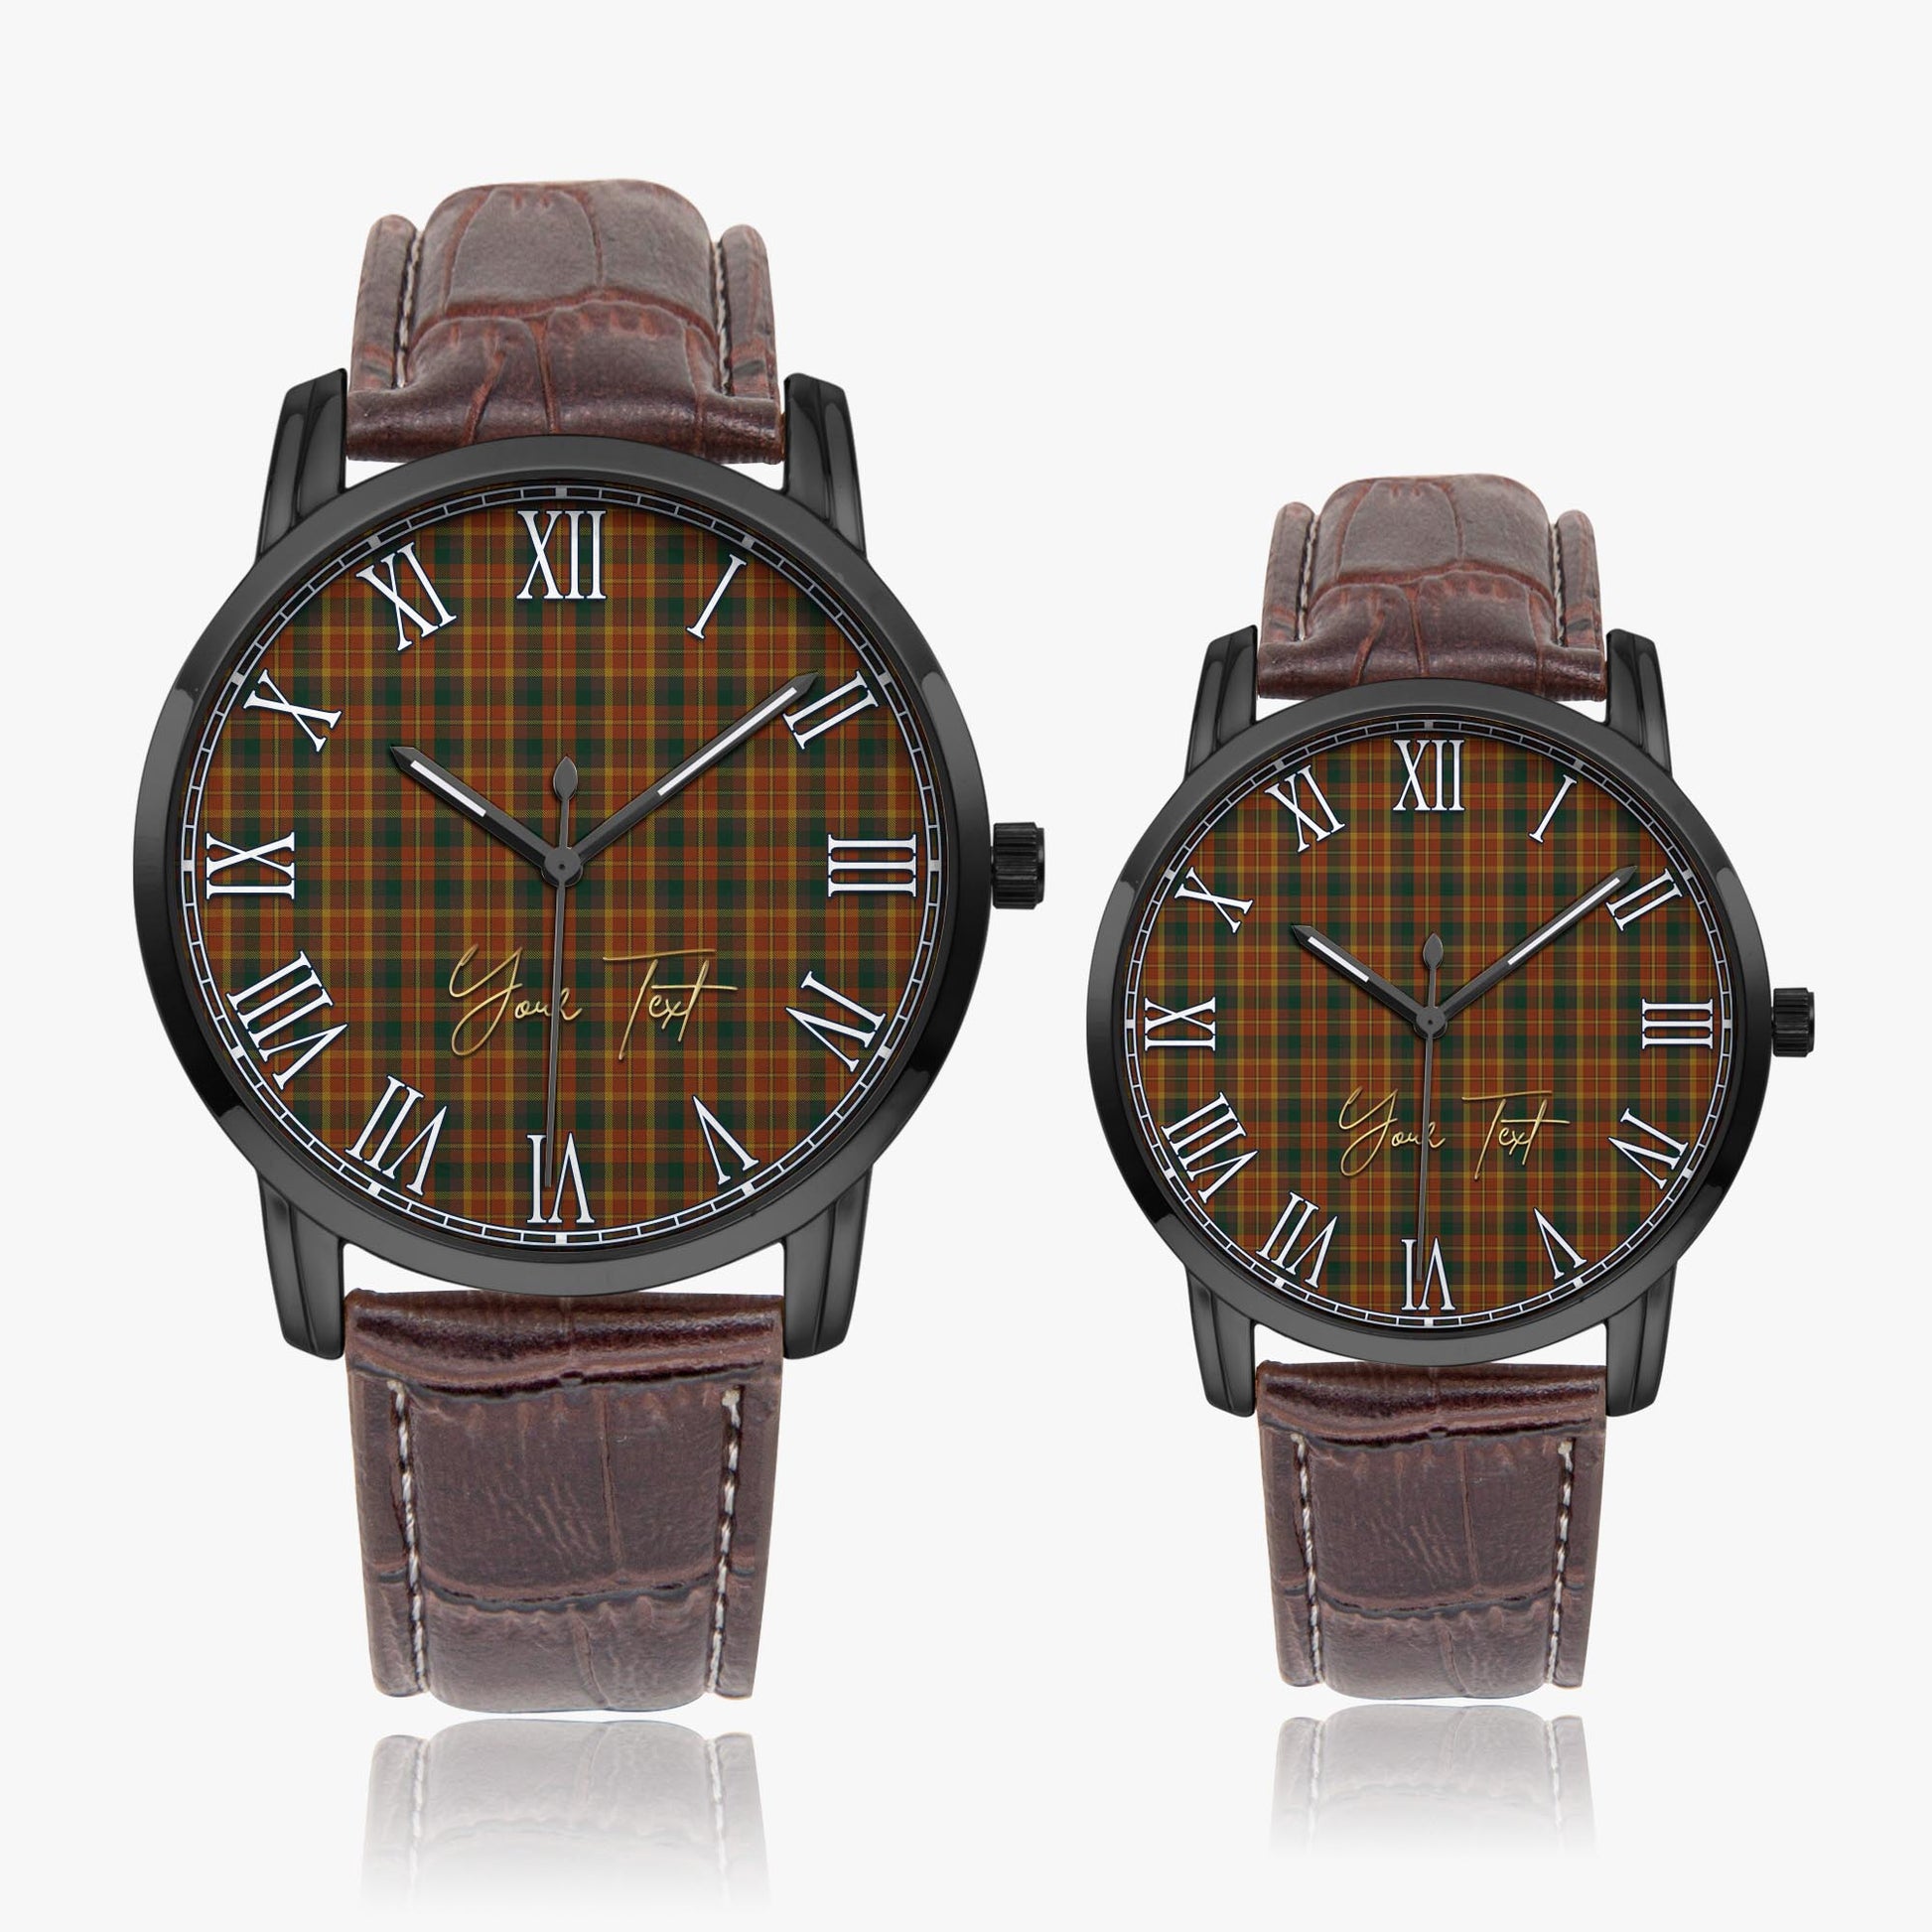 Monaghan County Ireland Tartan Personalized Your Text Leather Trap Quartz Watch Wide Type Black Case With Brown Leather Strap - Tartanvibesclothing